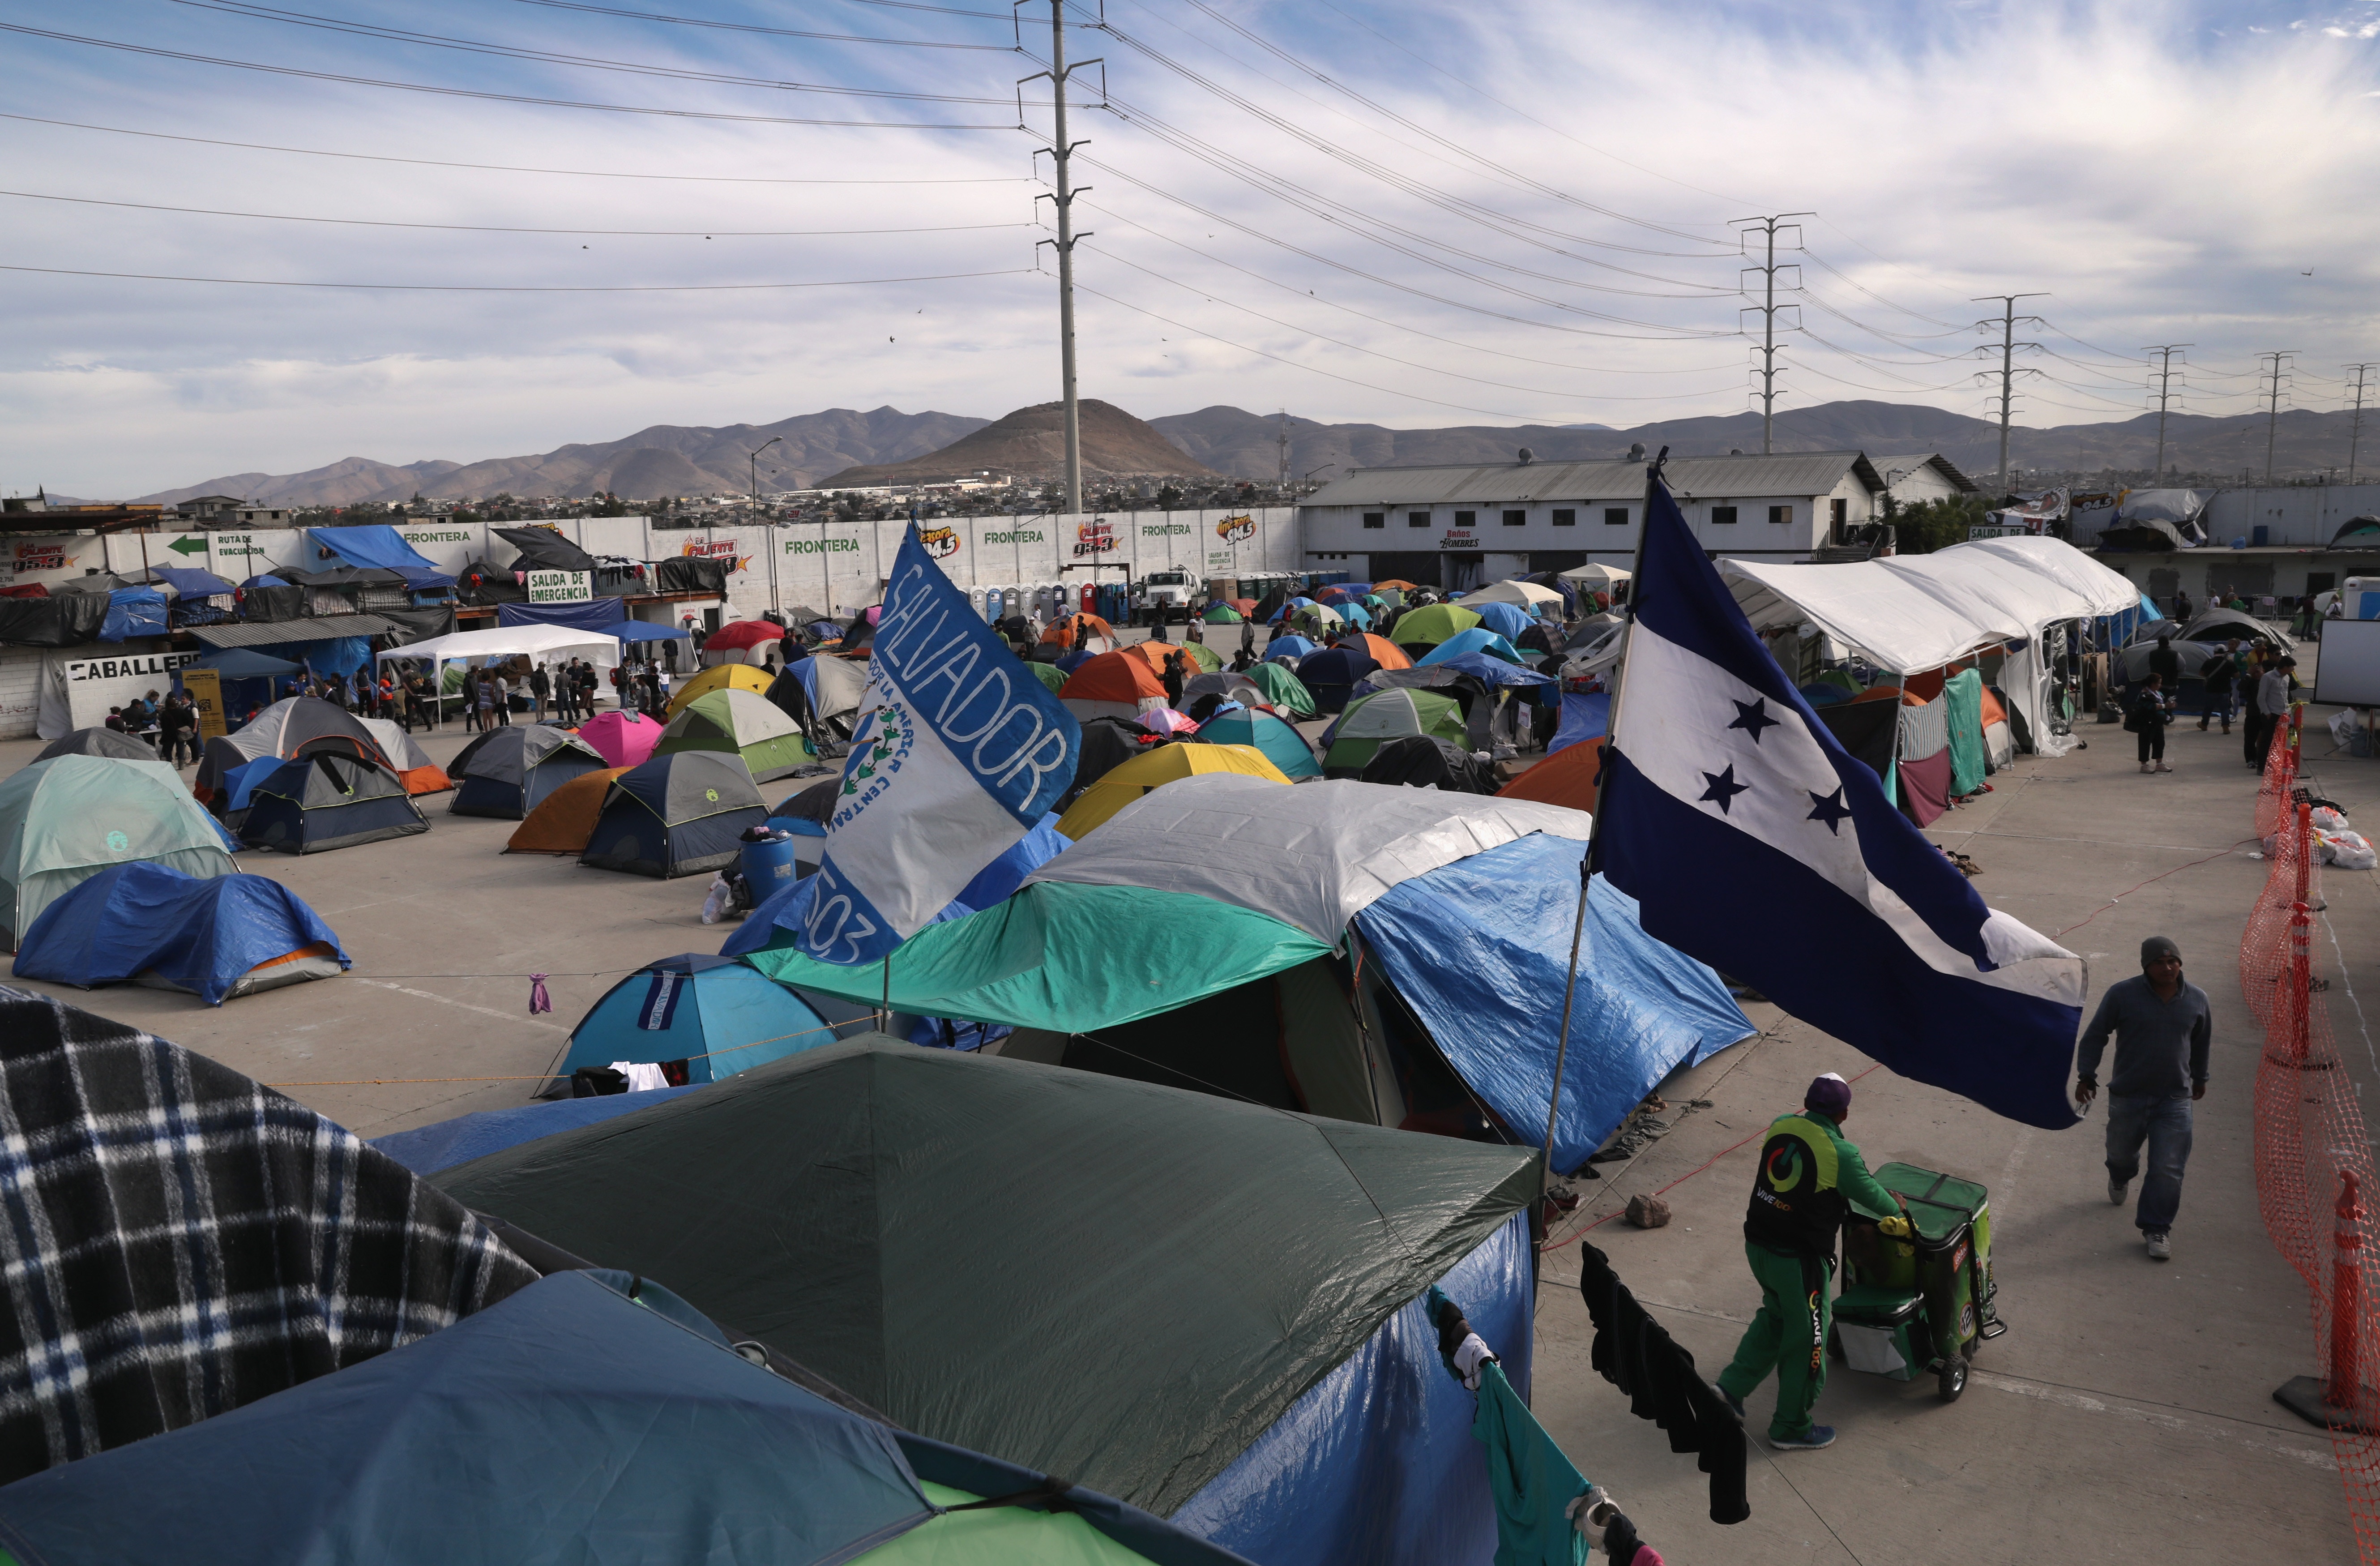 TIJUANA, MEXICO - DECEMBER 04:  Honduran and Salvadorian flags fly over the Barretal migrant caravan camp on December 4, 2018 from Tijuana, Mexico. After traveling more than 6 weeks from Central America, thousands of immigrants remain in Tijuana, many awaiting asylum interviews and others deciding whether to cross illegally into the United States. (Photo by John Moore/Getty Images)